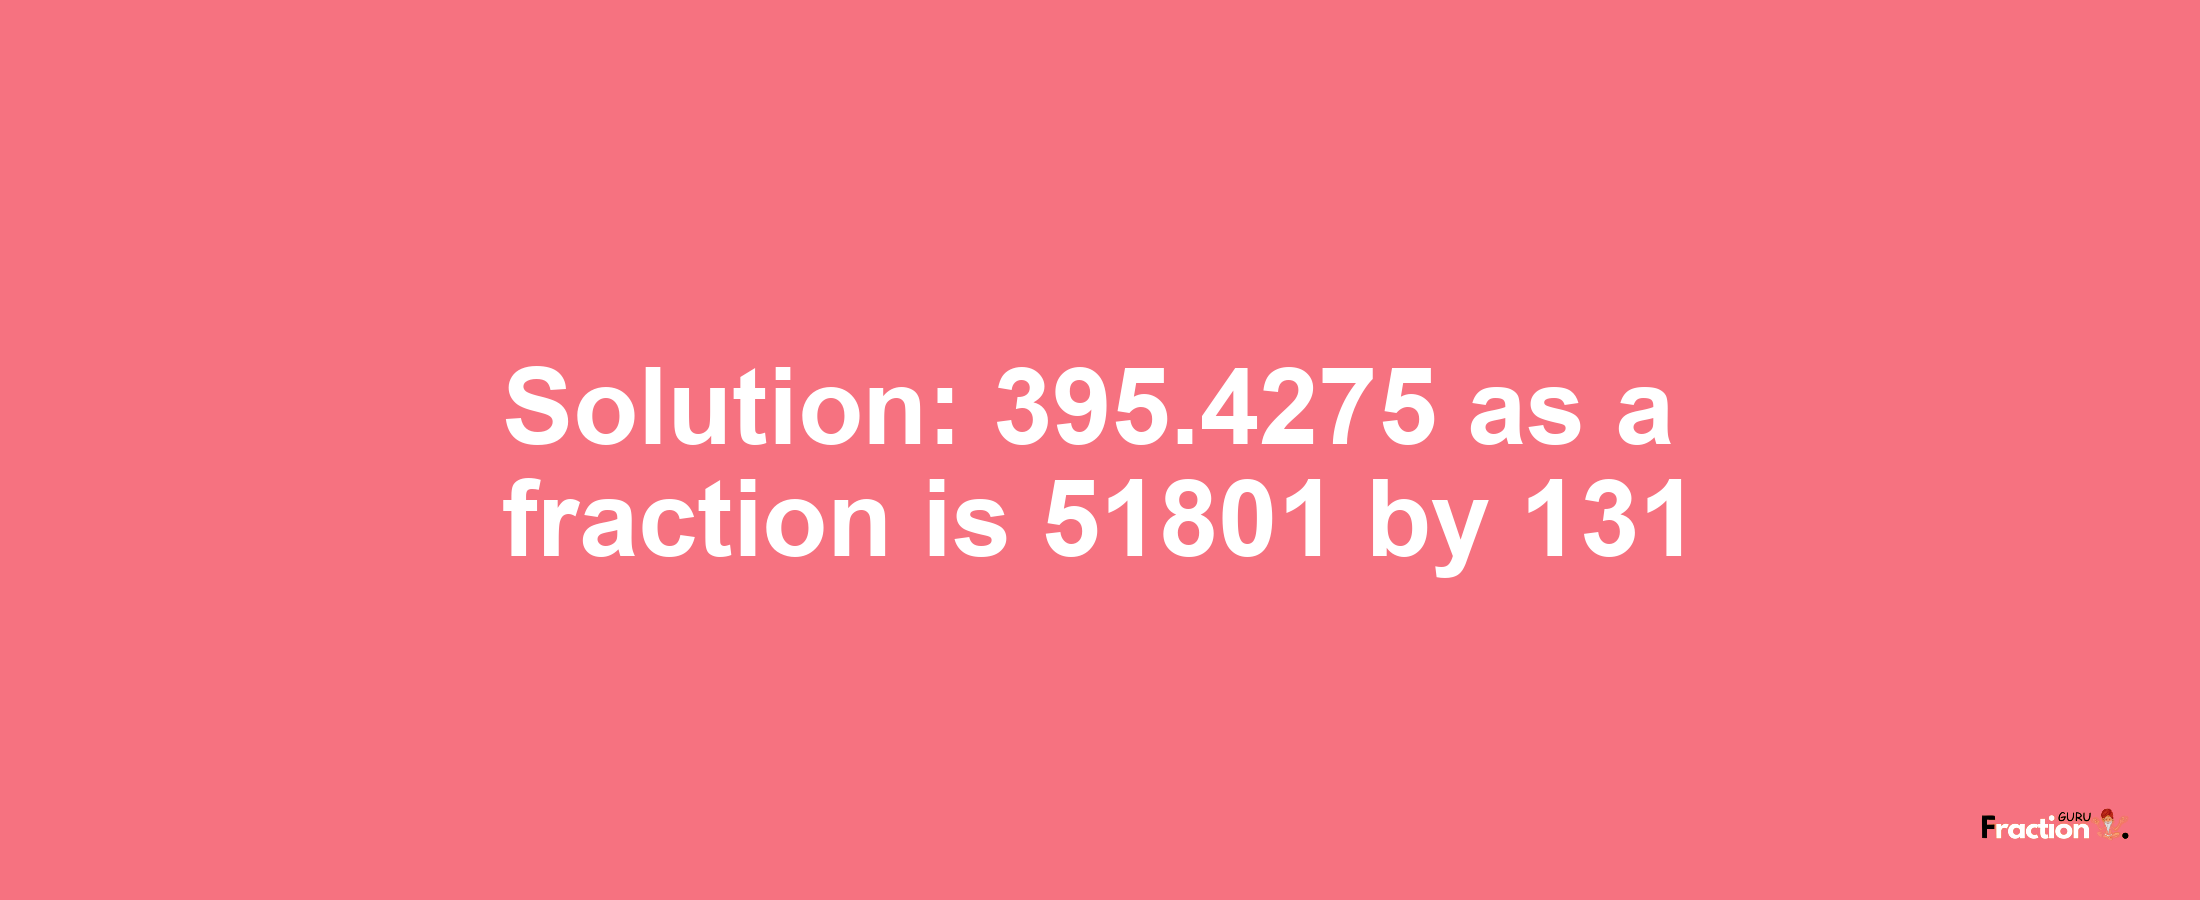 Solution:395.4275 as a fraction is 51801/131